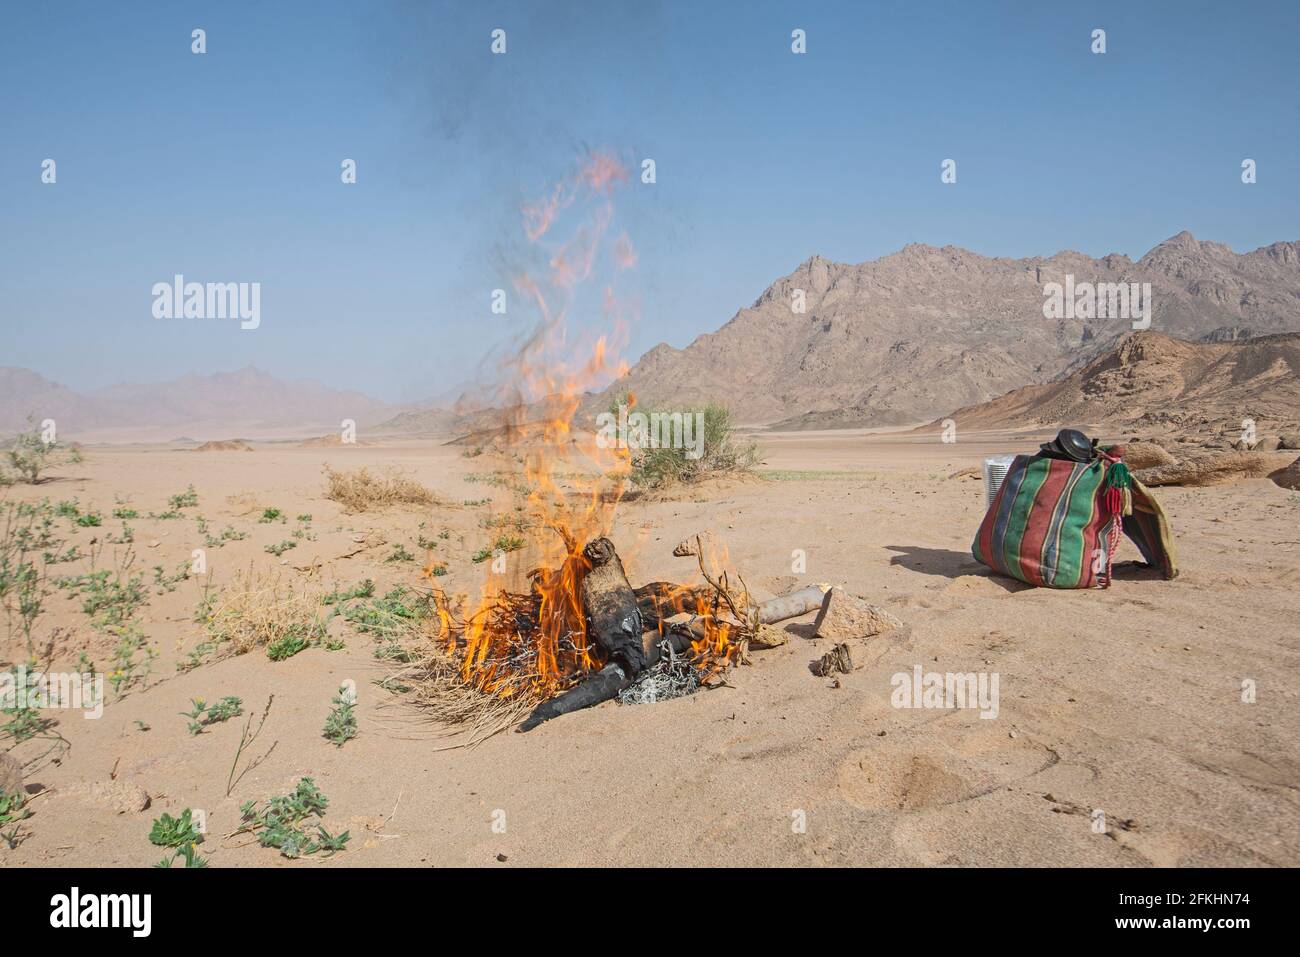 Landscape scenic view of desolate barren eastern desert in Egypt with campfire burning for cooking Stock Photo